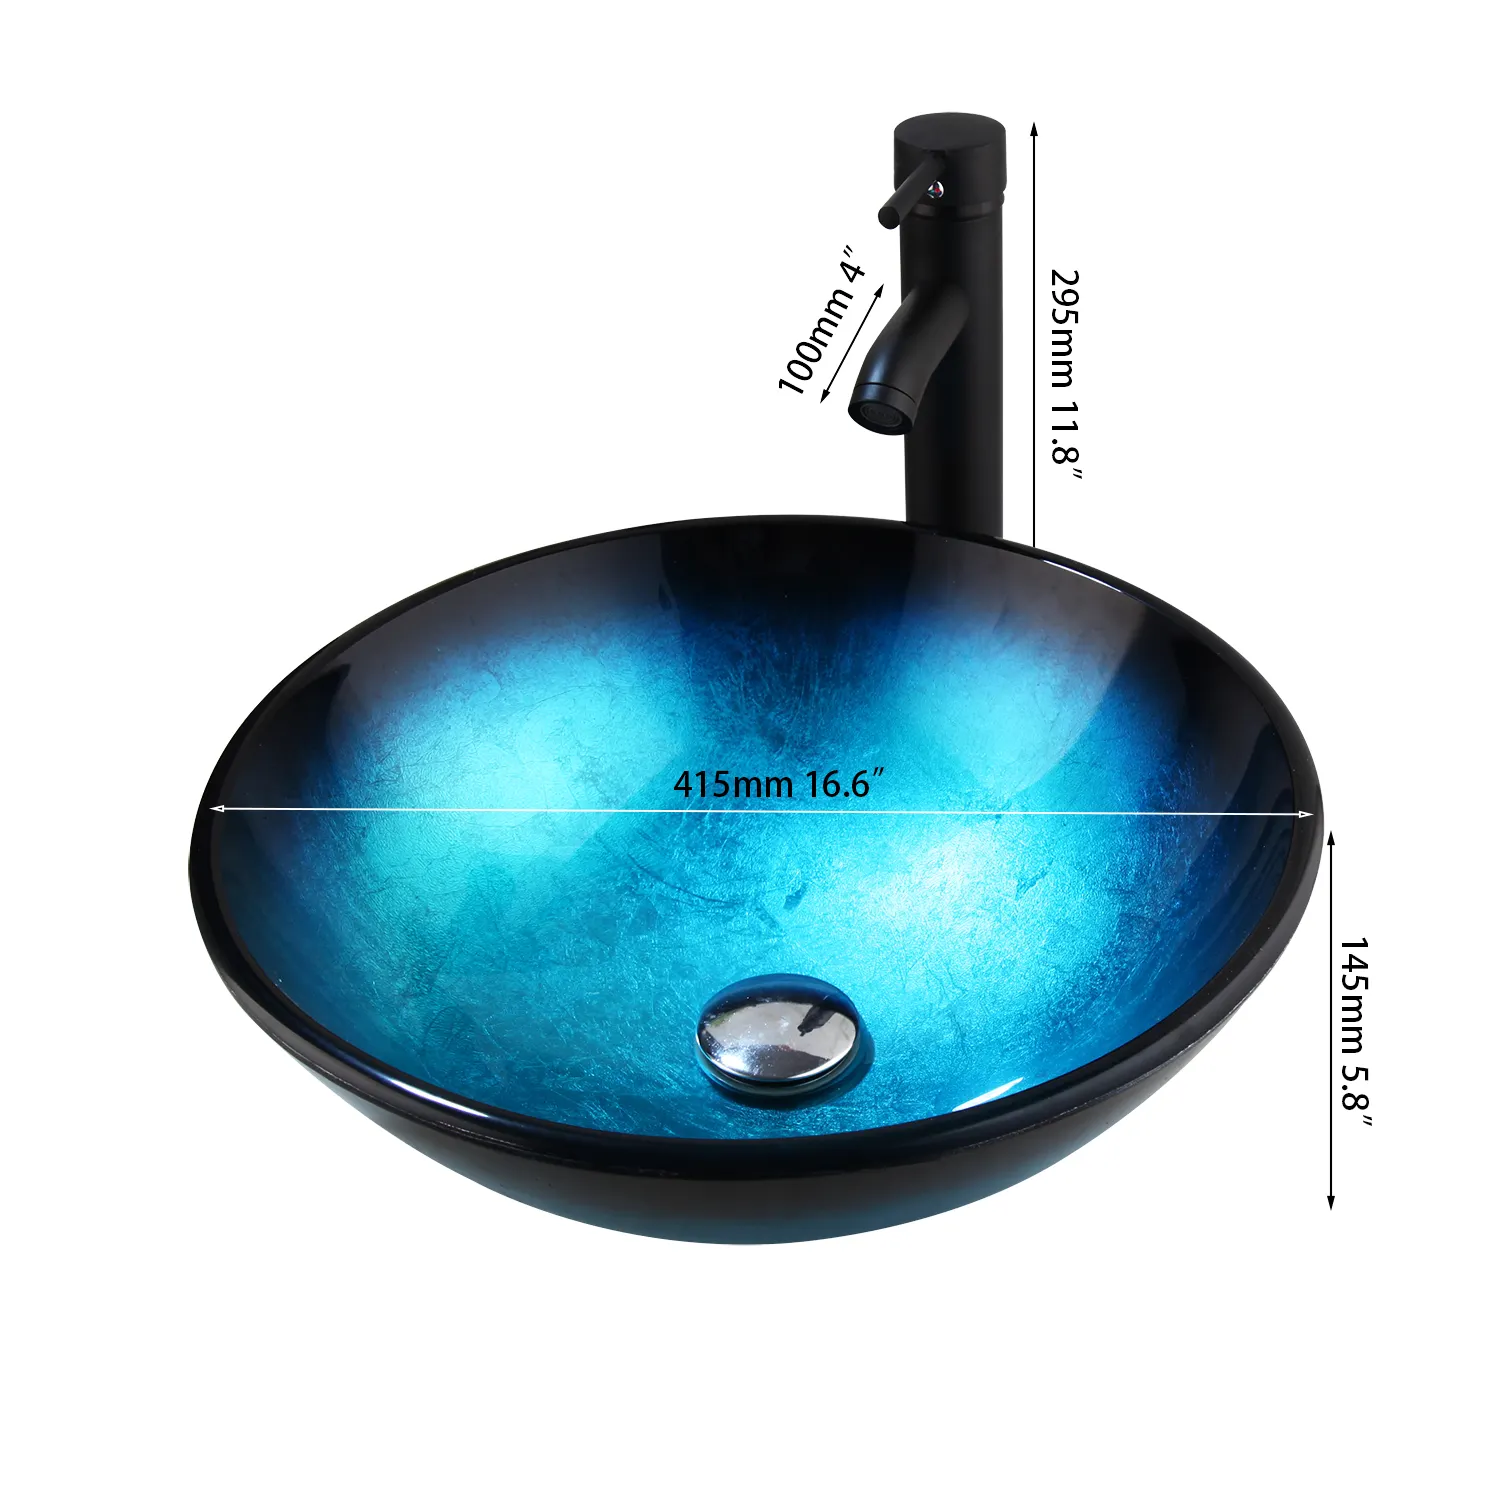 Blue Bathroom Glass Vessel Sinks Round Countertop Basin Bowl Combo With Black Mixer Faucet and Pop-up Drain Set